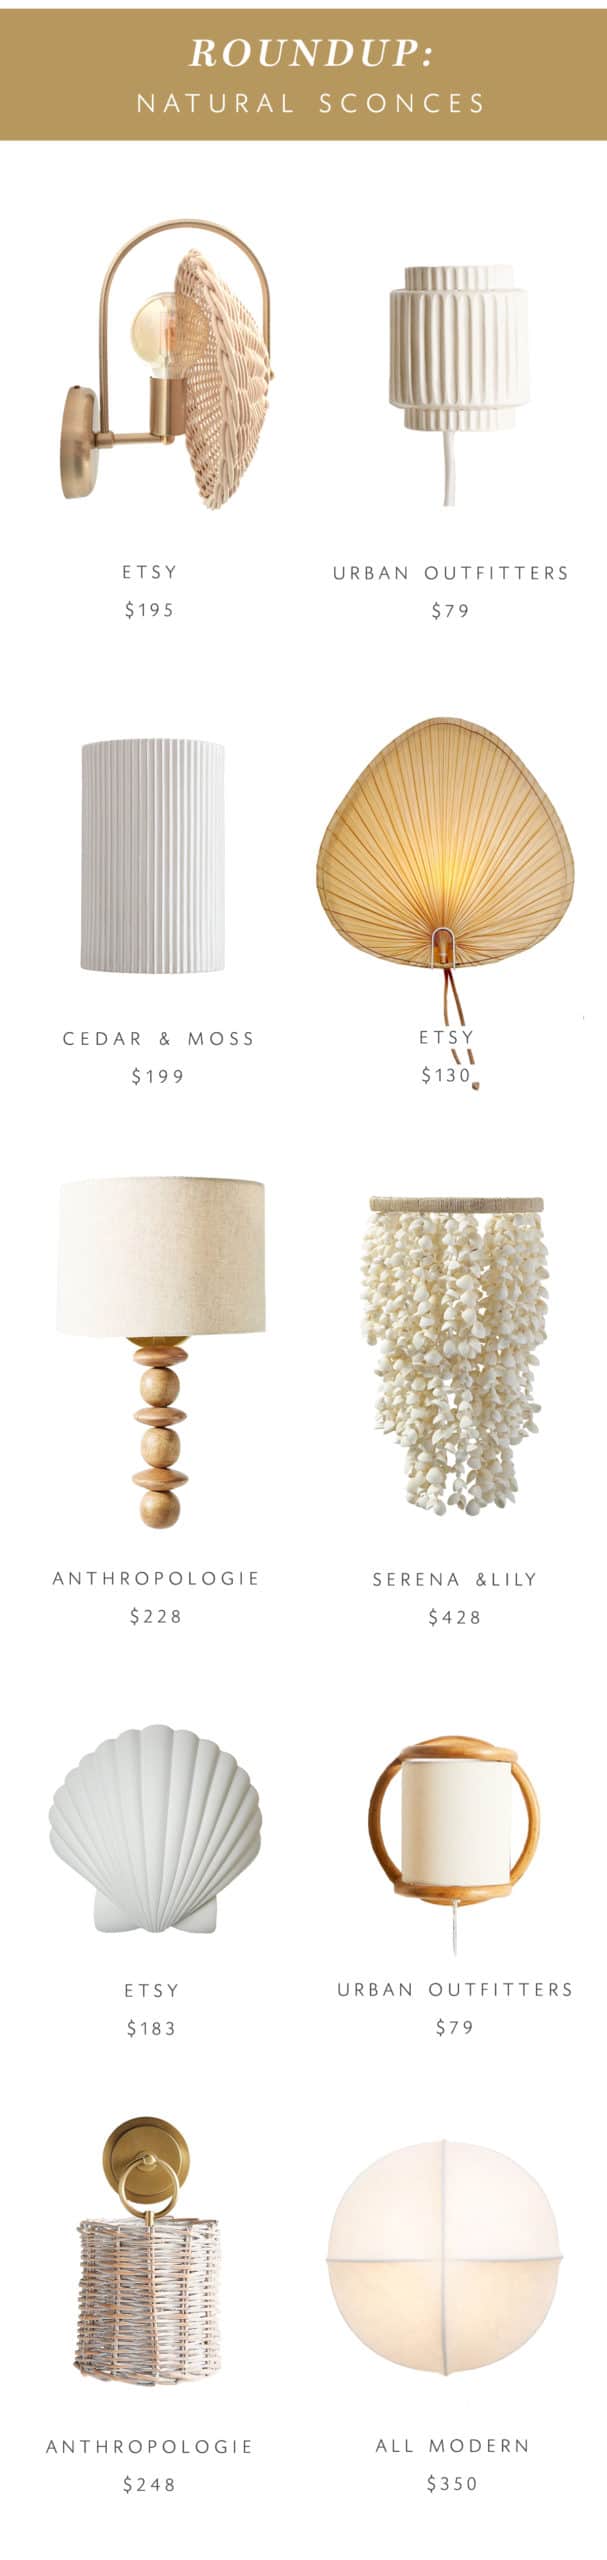 sconce-roundup-natural-texture-and-materials